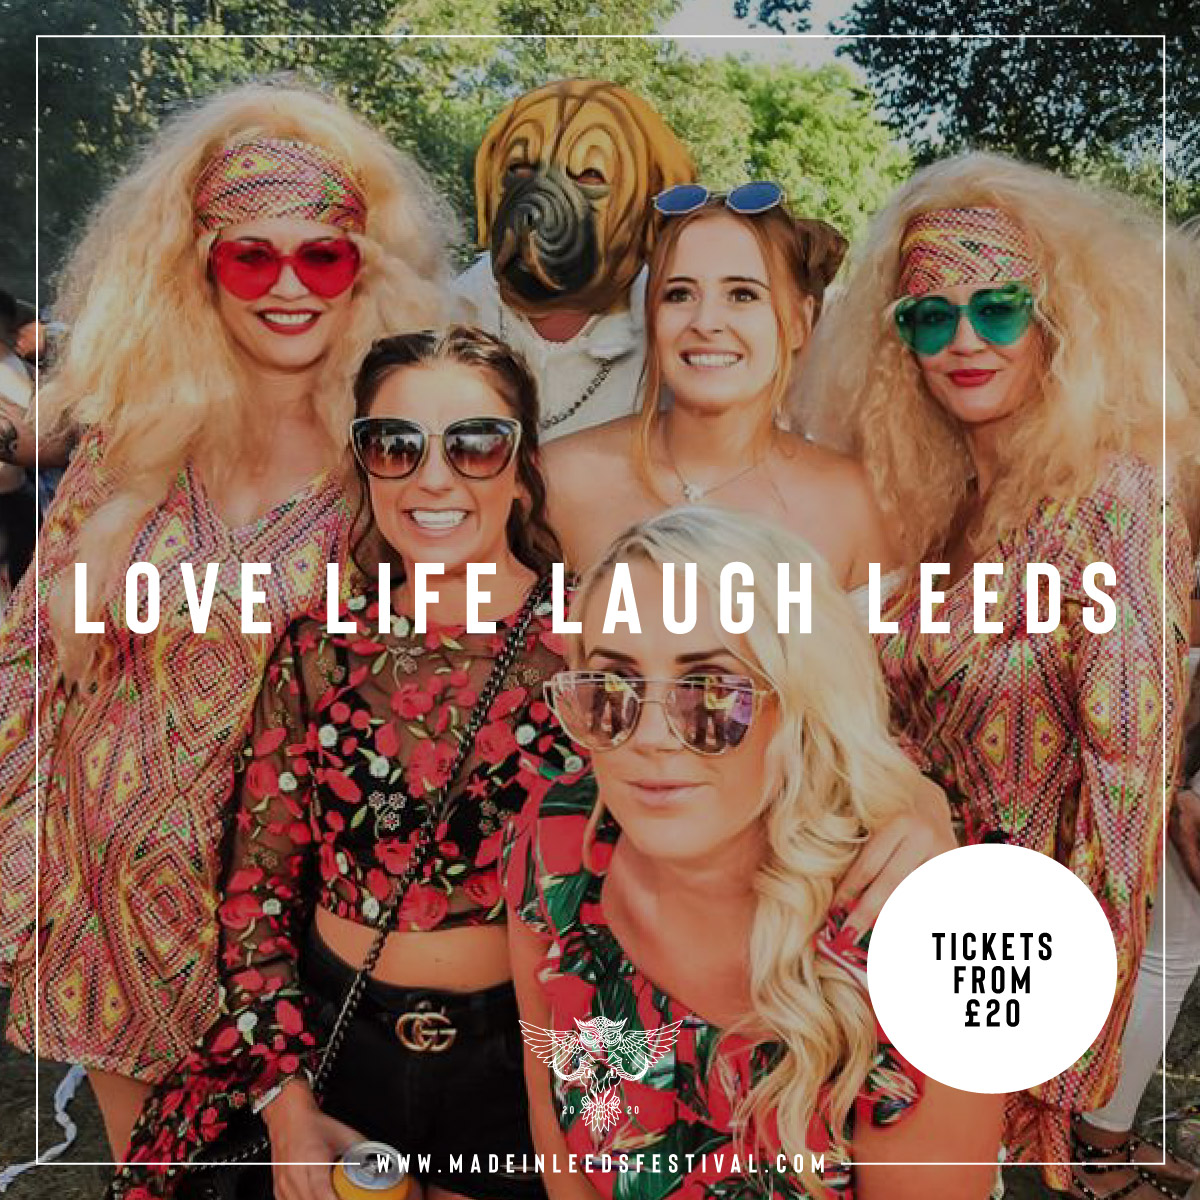 A New Chapter Begins for Leeds’ Most Loved Festival!

Saturday 27th June at South Leeds Stadium will be our biggest and boldest year to date!

Join us and get Limited £20 Early Bird Tickets On Sale Now

#MILF2020 #MadeInleeds #SouthLeedsStadium